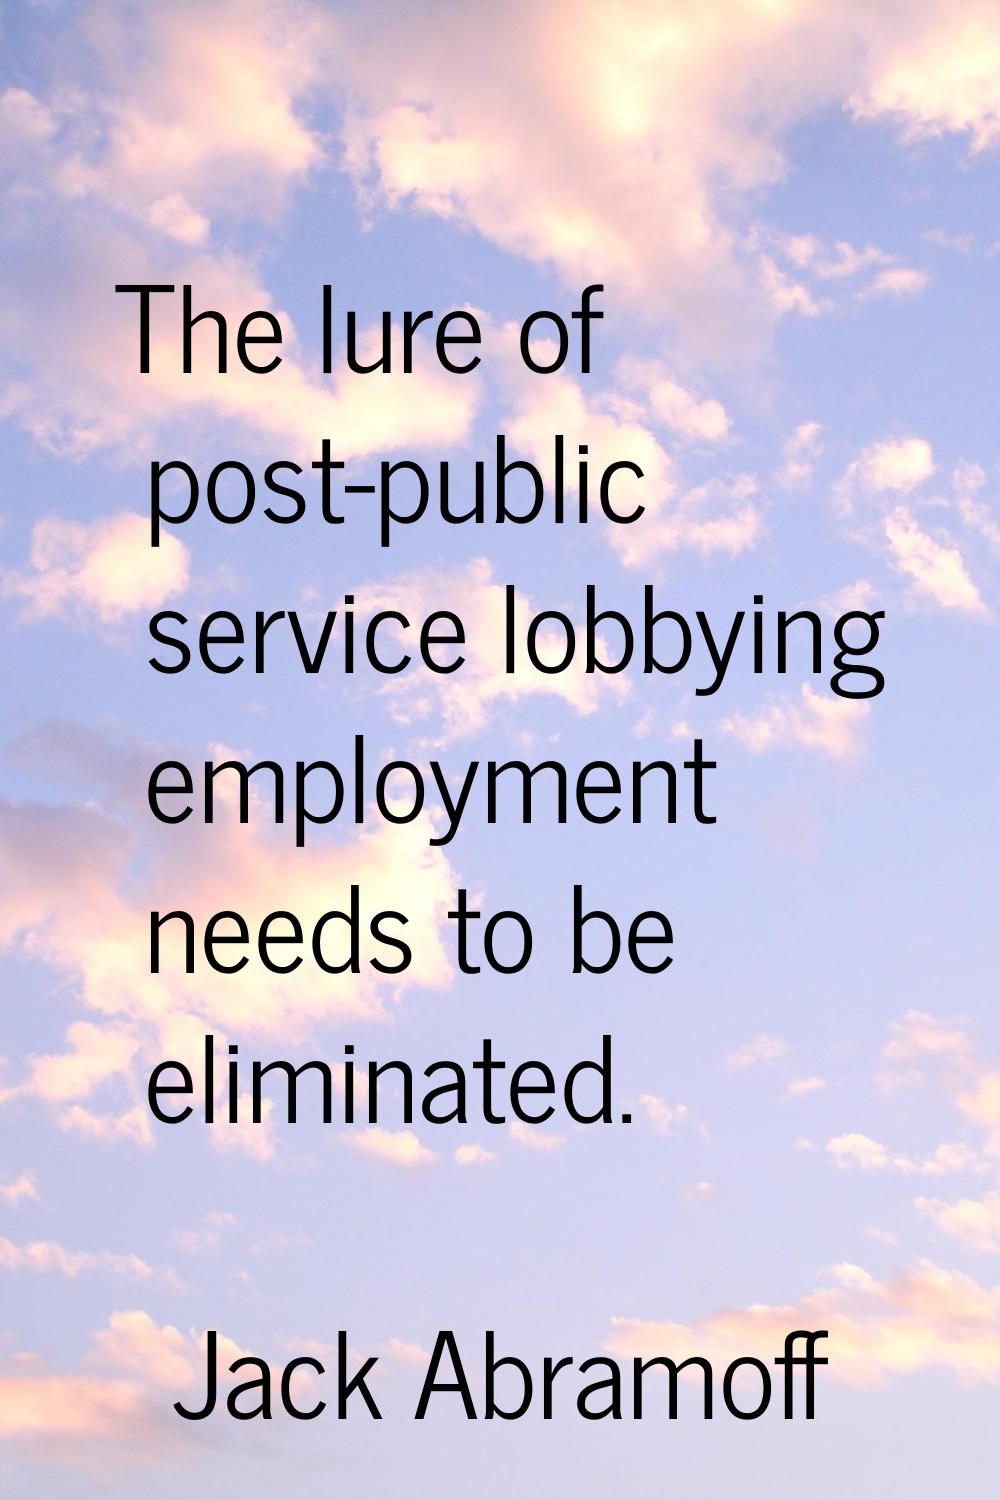 The lure of post-public service lobbying employment needs to be eliminated.